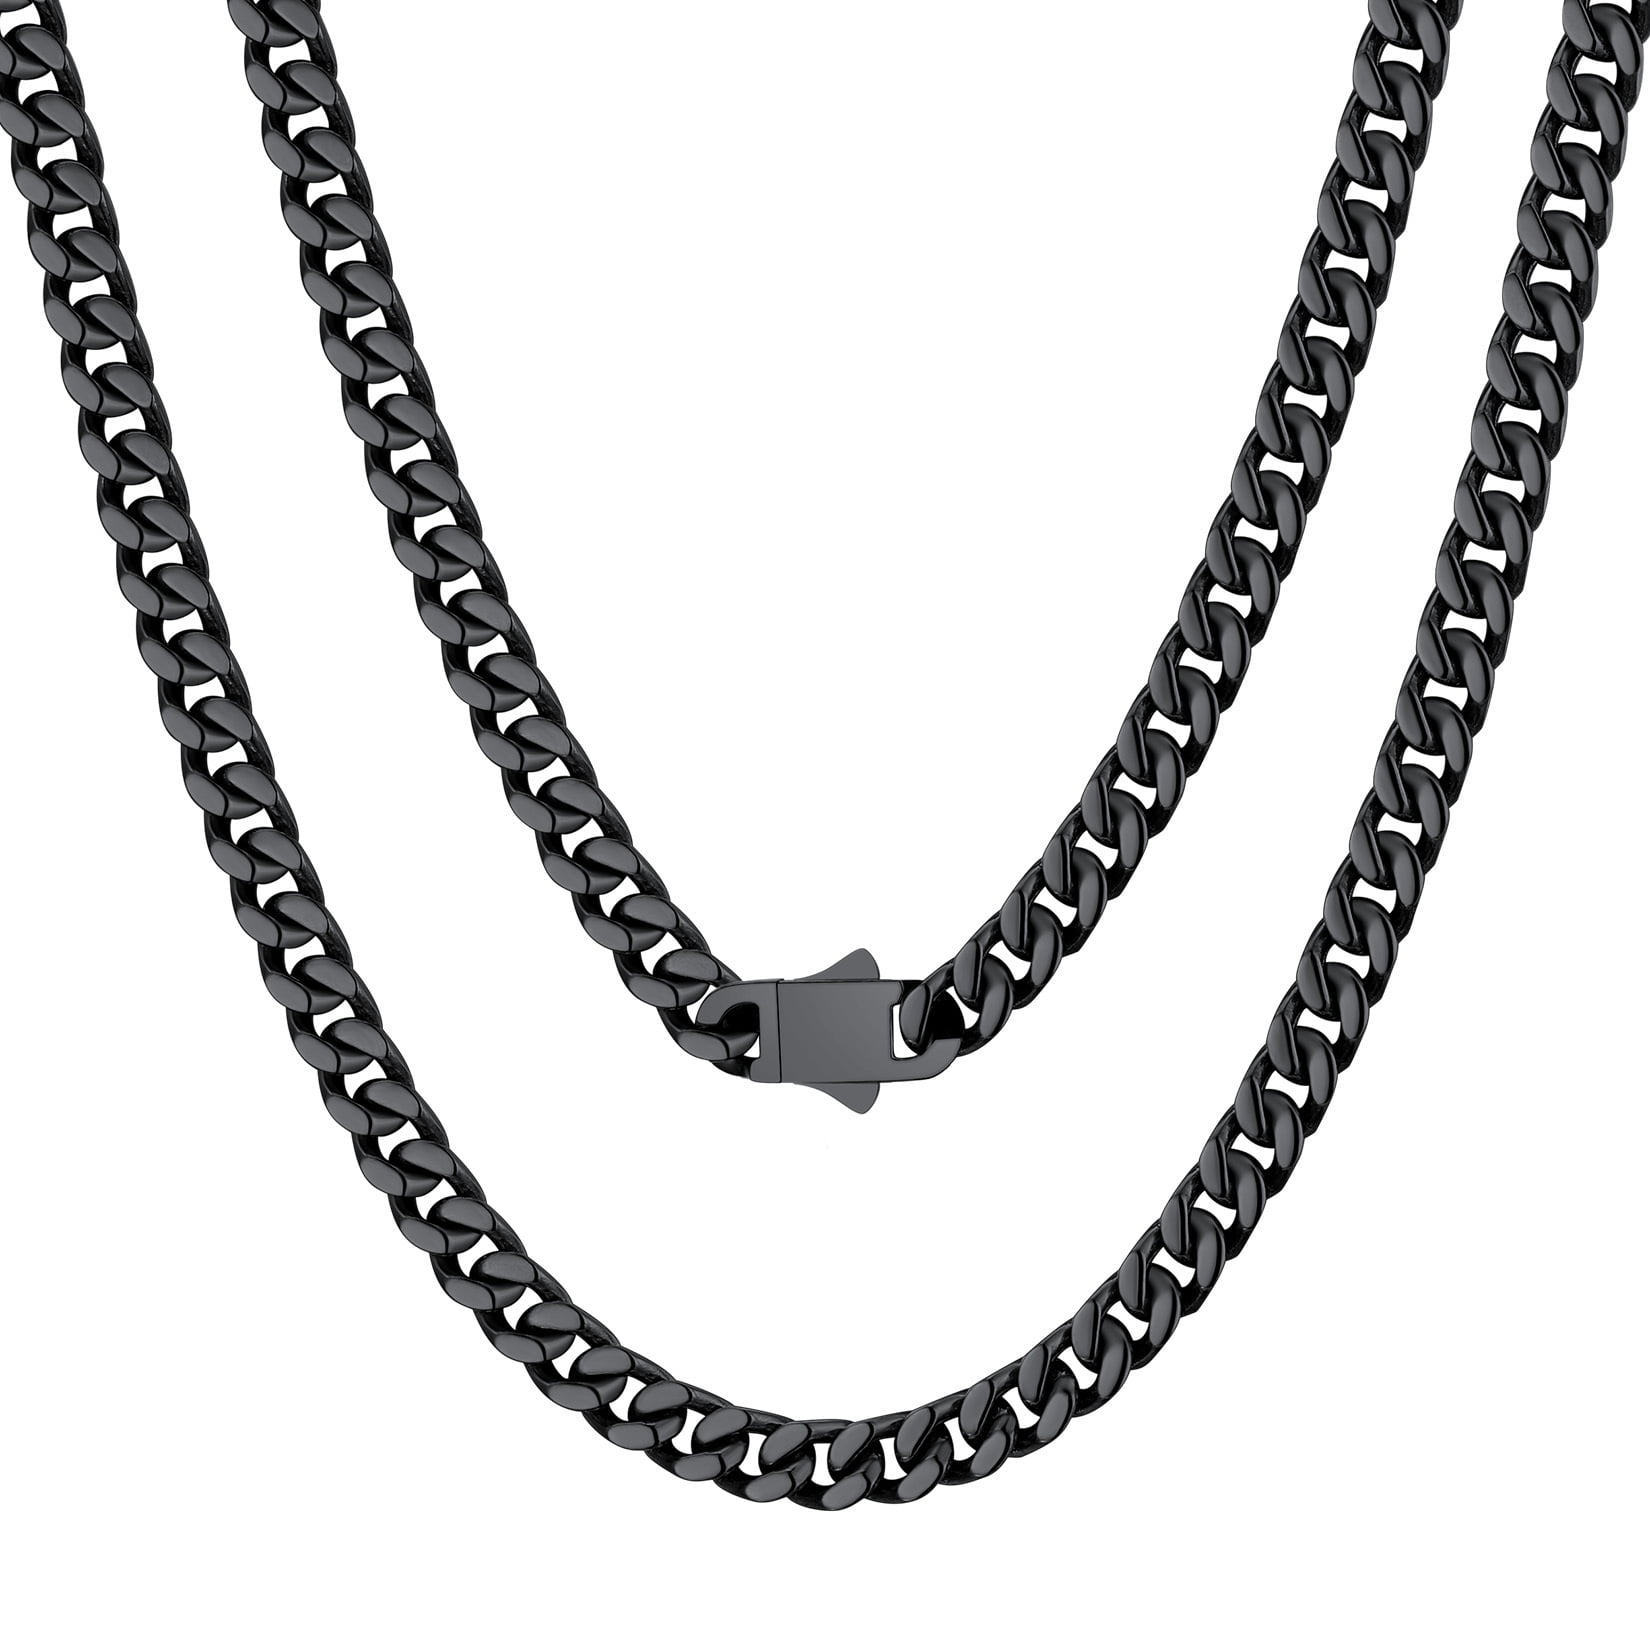 ChainsProMax Black Necklace Chain for Men 28inch Mens Black Necklace Black  Mens Everyday Chain